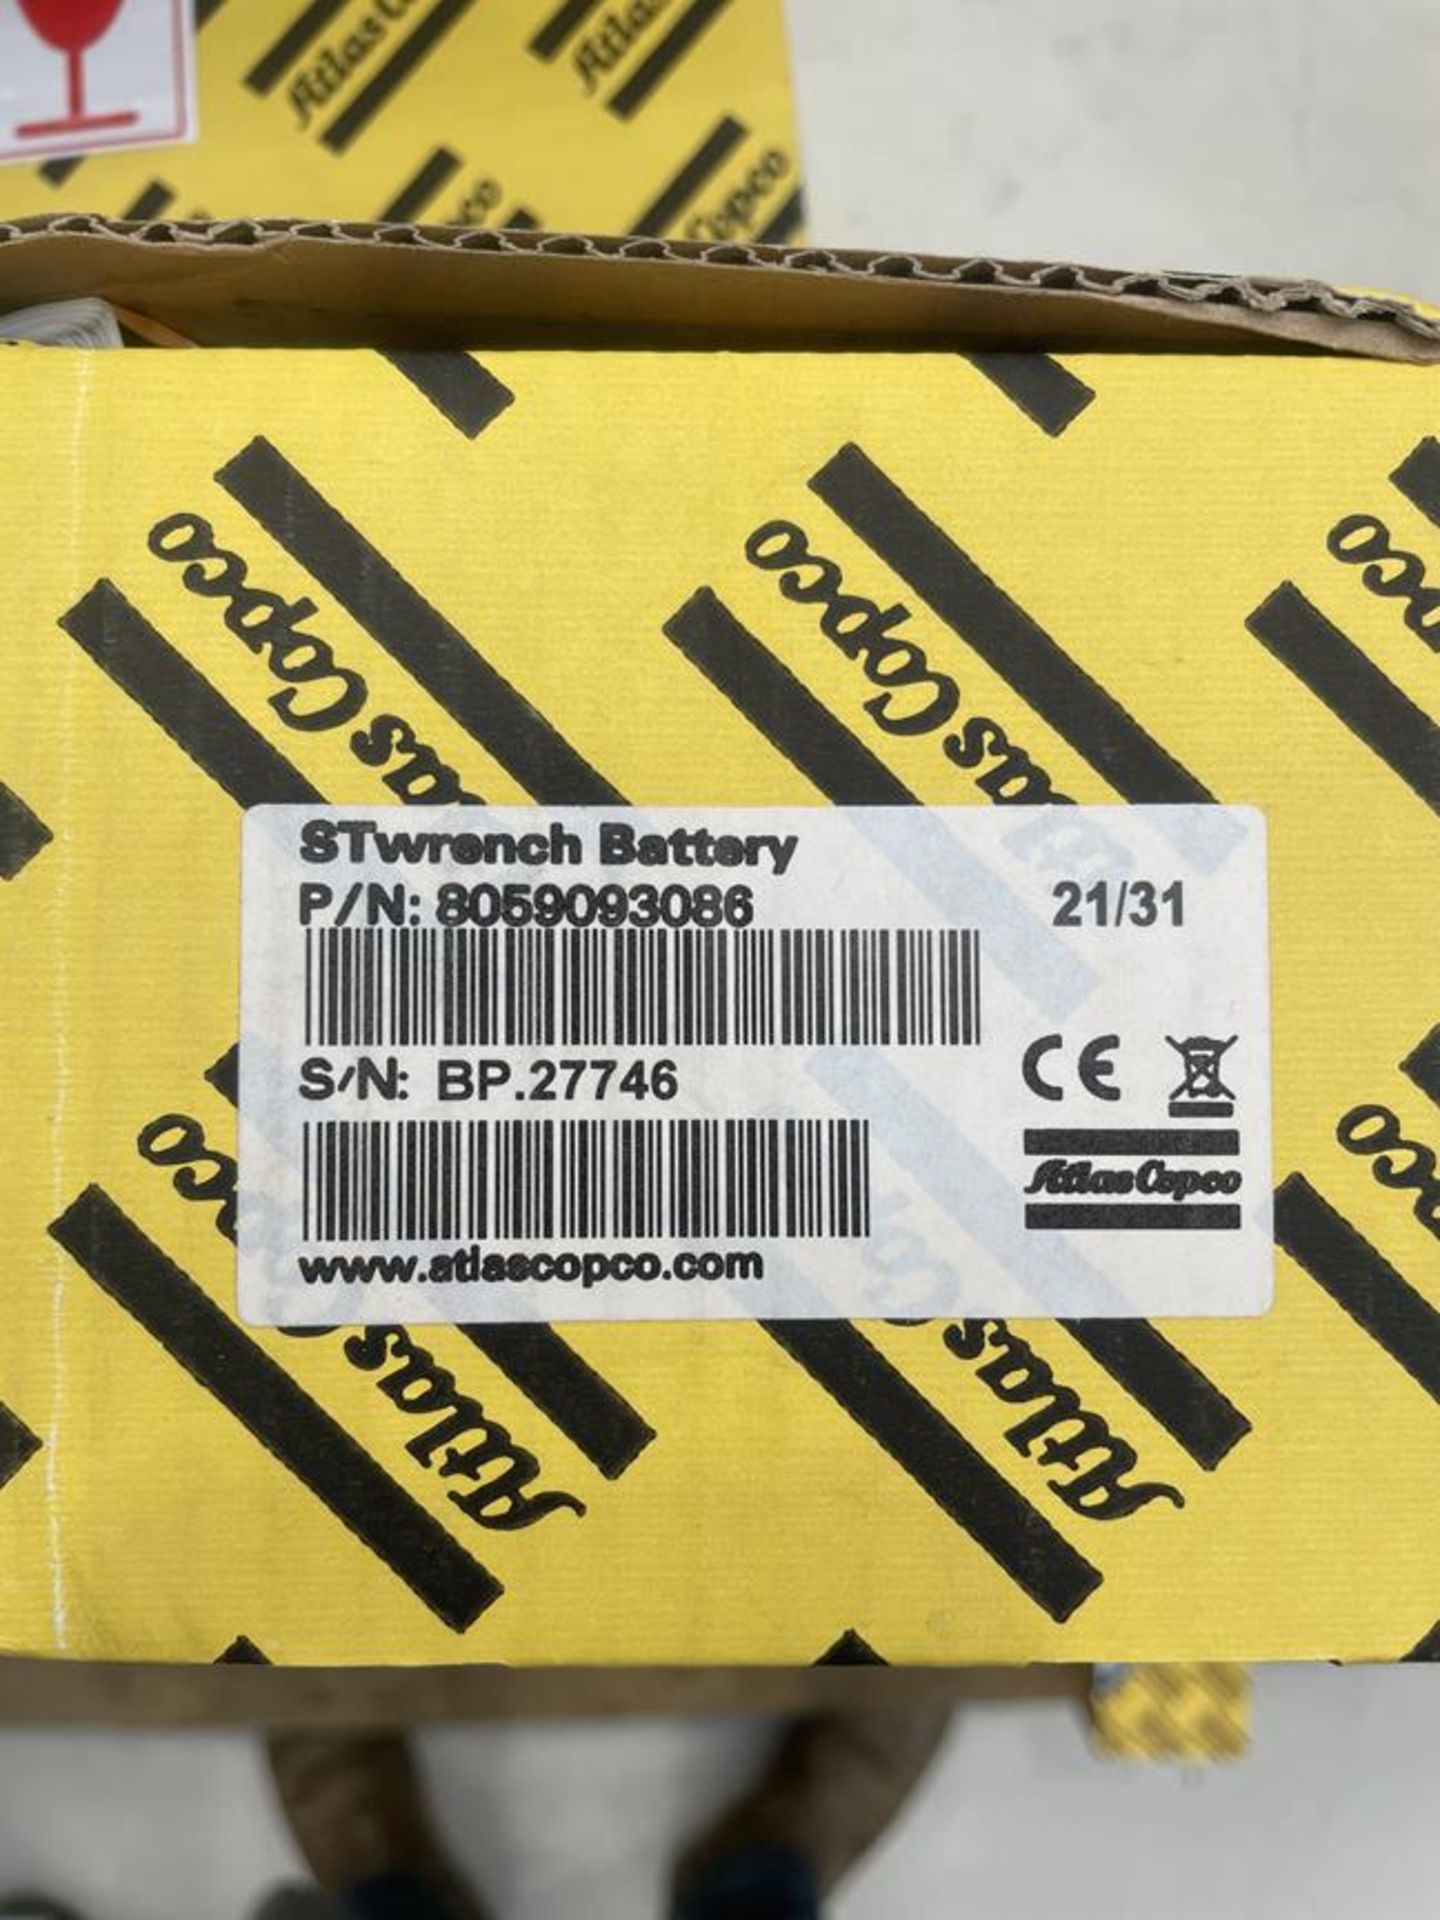 4x (no.) Atlas Copco, St wrench batteries, Part No. 8059093086 (boxed and unused) - Image 3 of 3